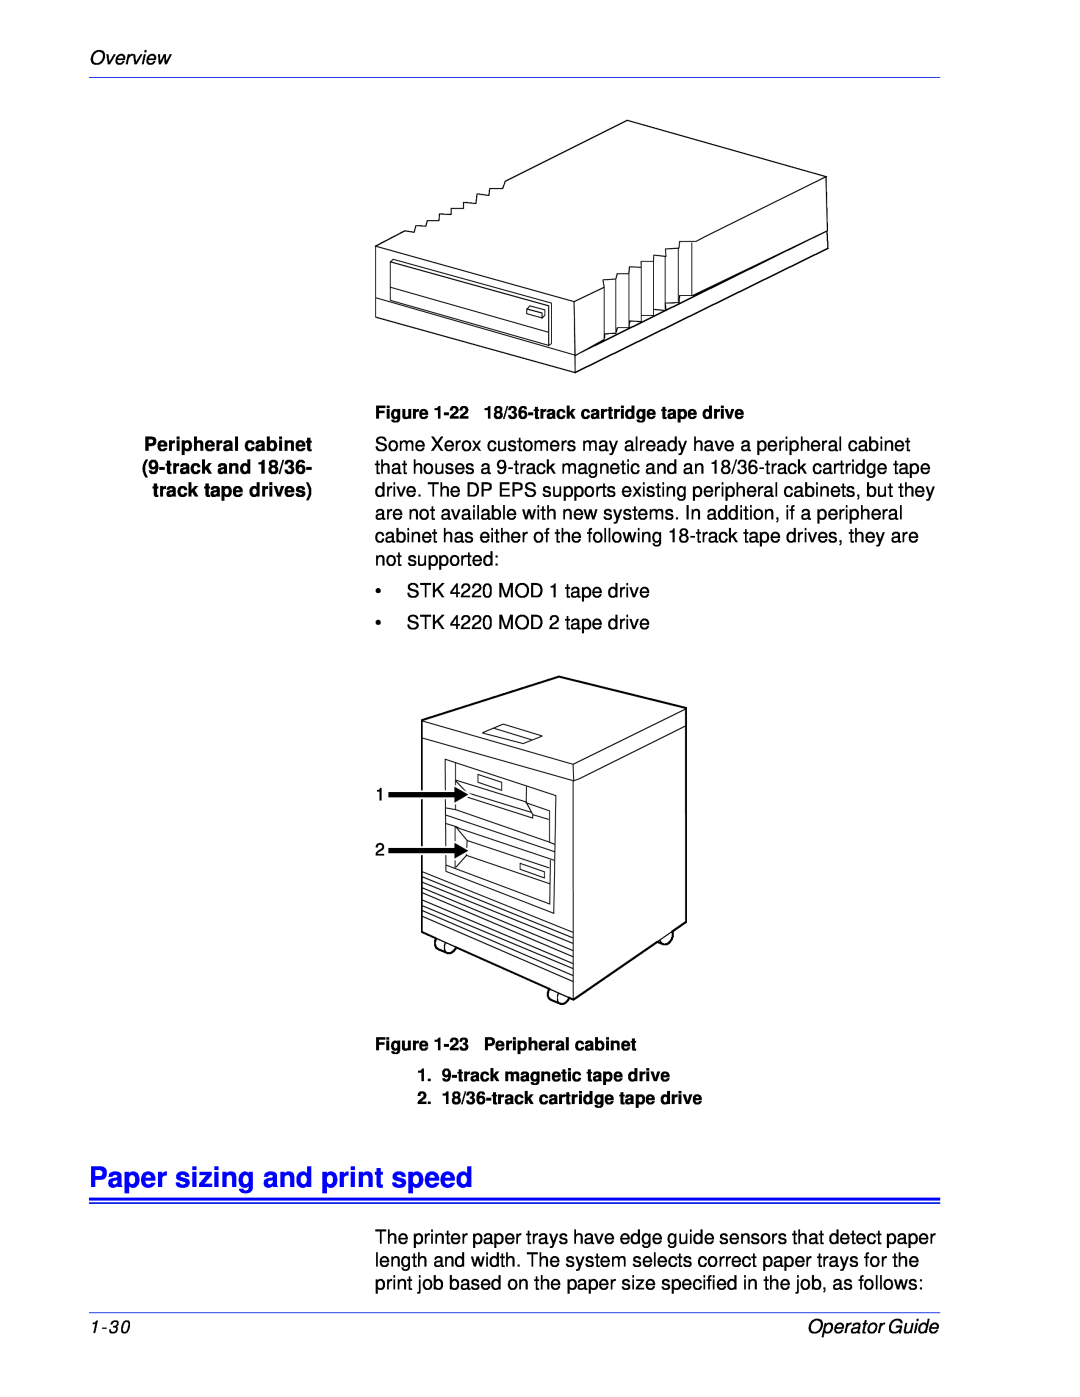 Xerox 100, 180 EPS manual Paper sizing and print speed, Overview 